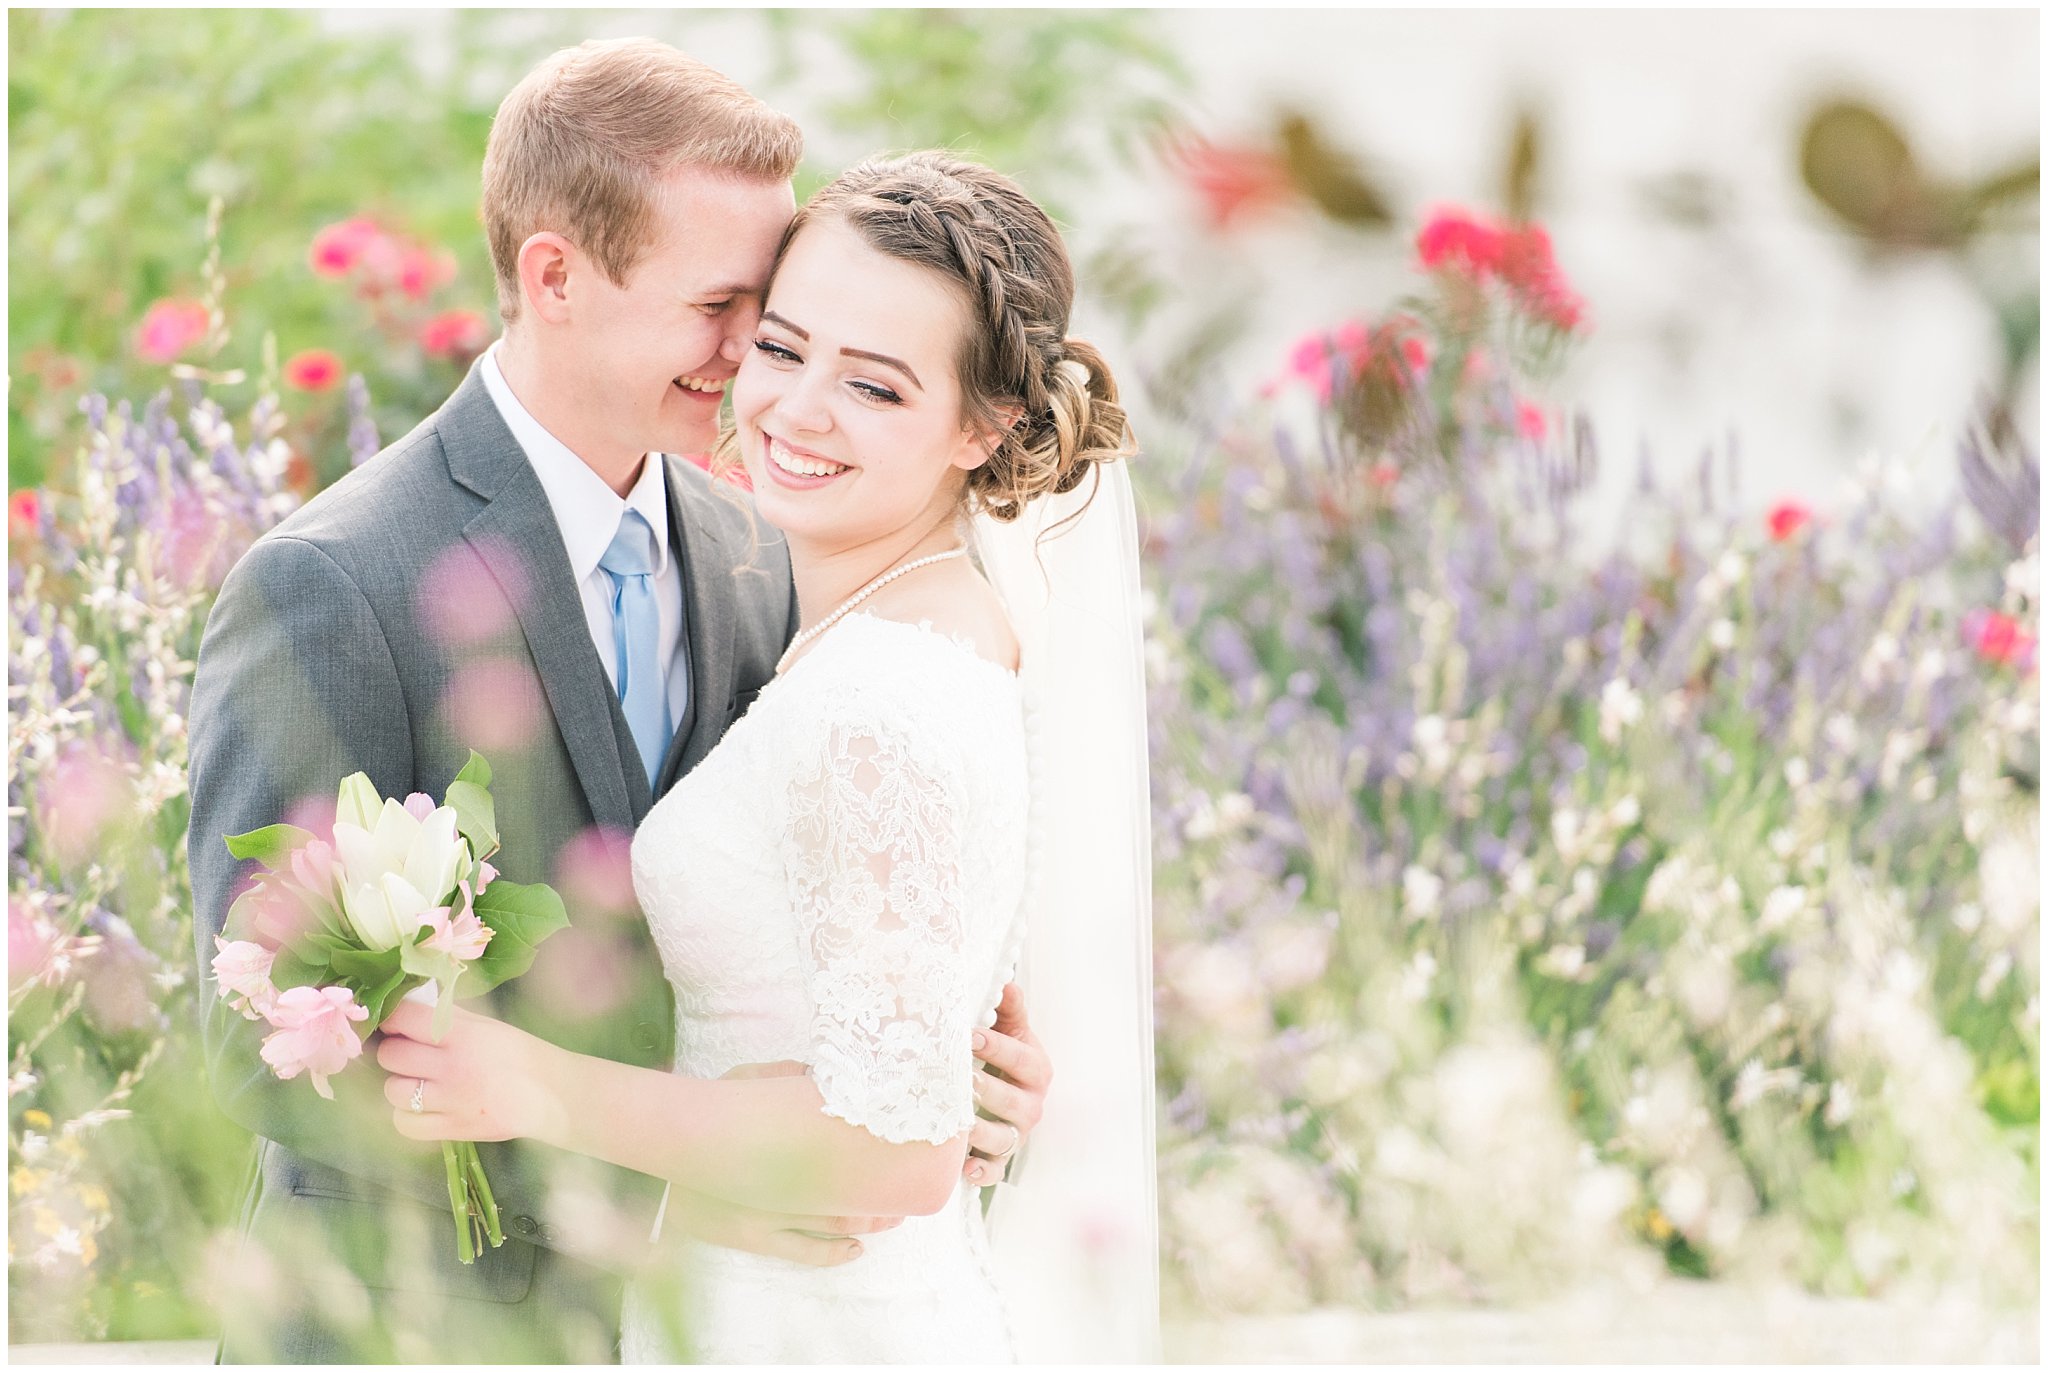 Bride and groom in the flowers at the Ogden Temple | Top Utah Wedding and Couples Photos 2019 | Jessie and Dallin Photography